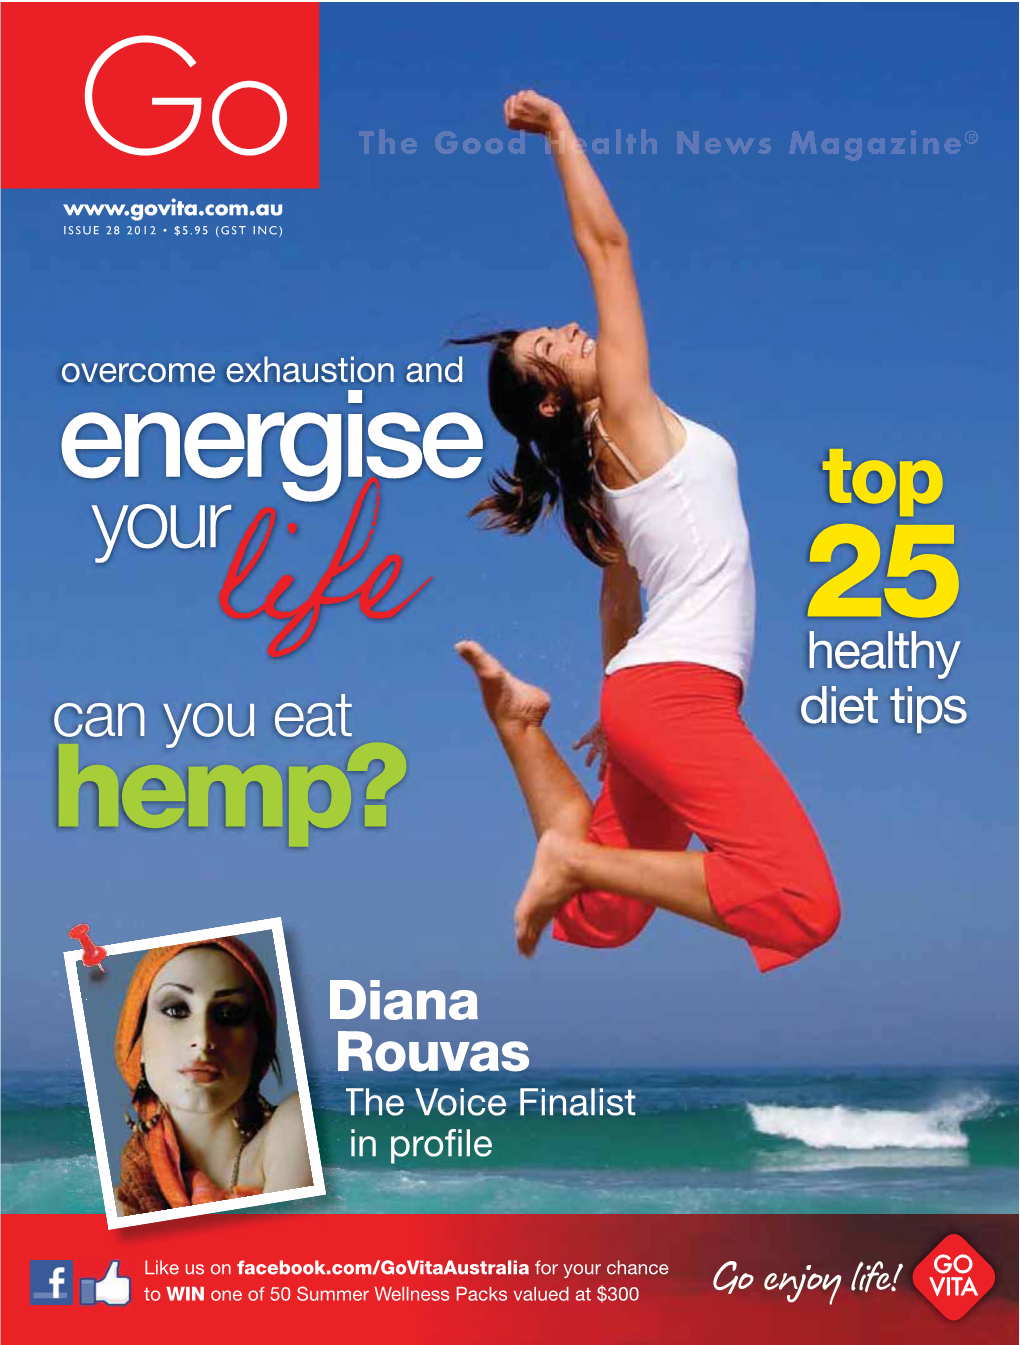 Your Life 25 Healthy Can You Eat Diet Tips Hemp?